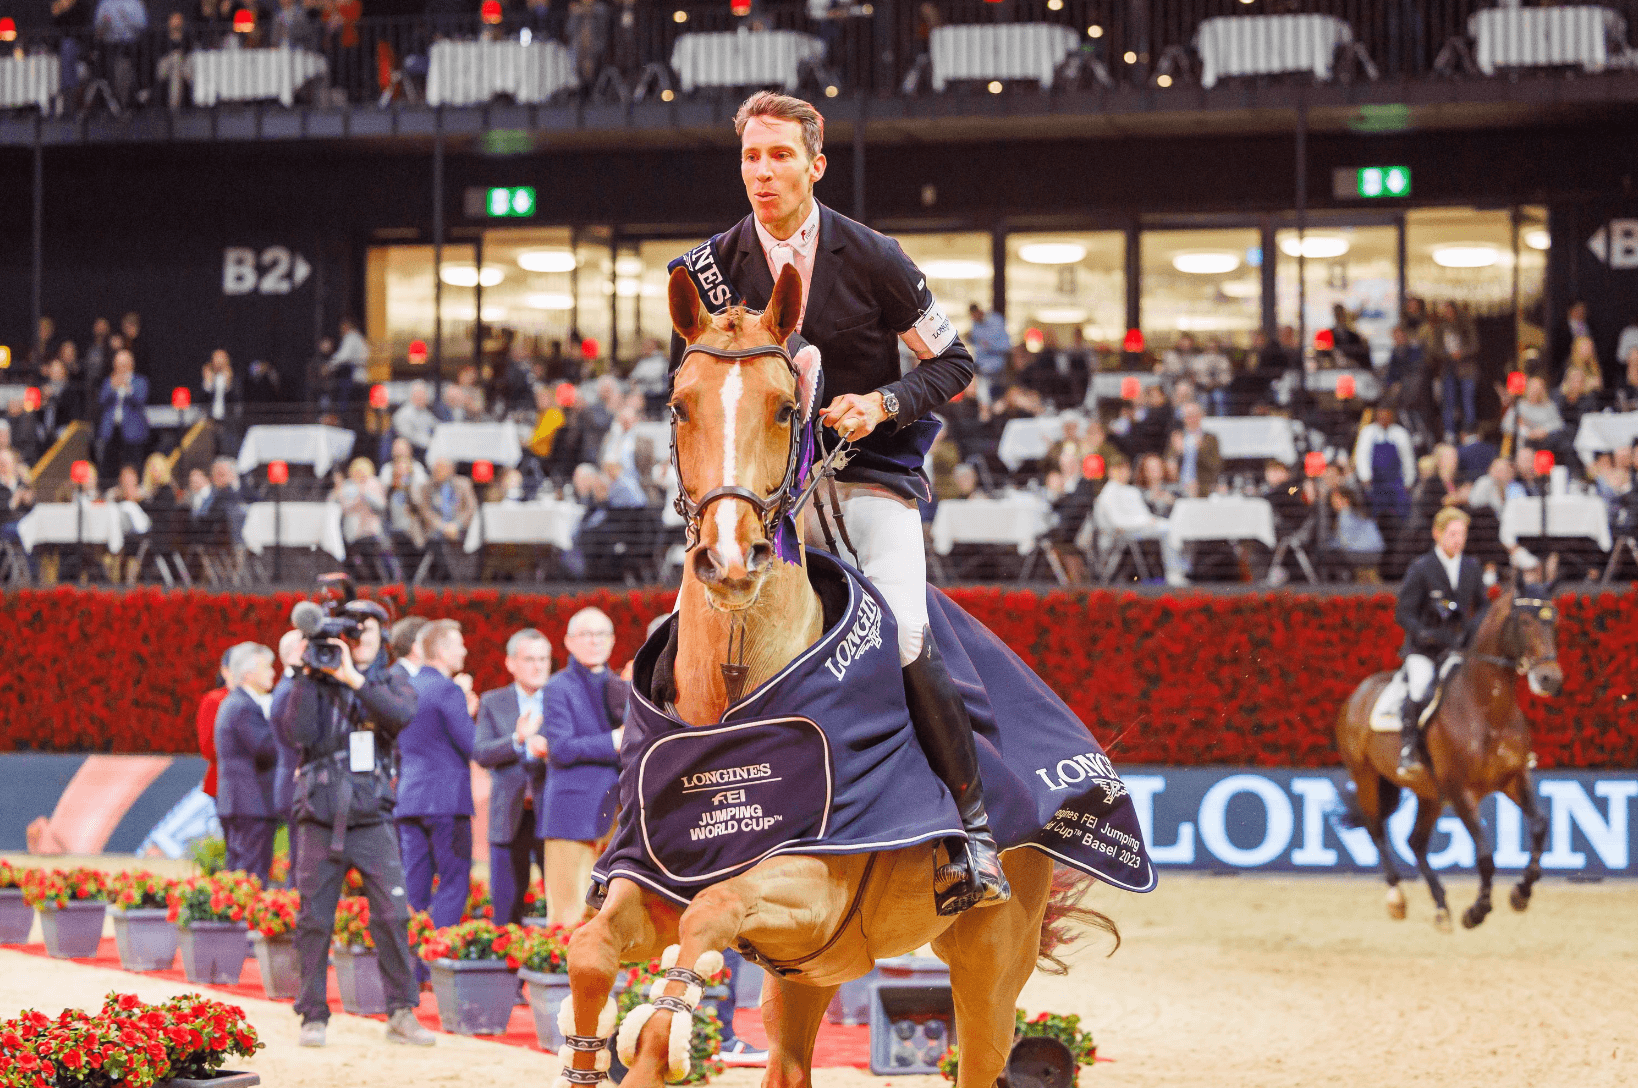 Henrik von Eckermann and King Edward live up to their title as World's No. 1, winning the World Cup of Basel